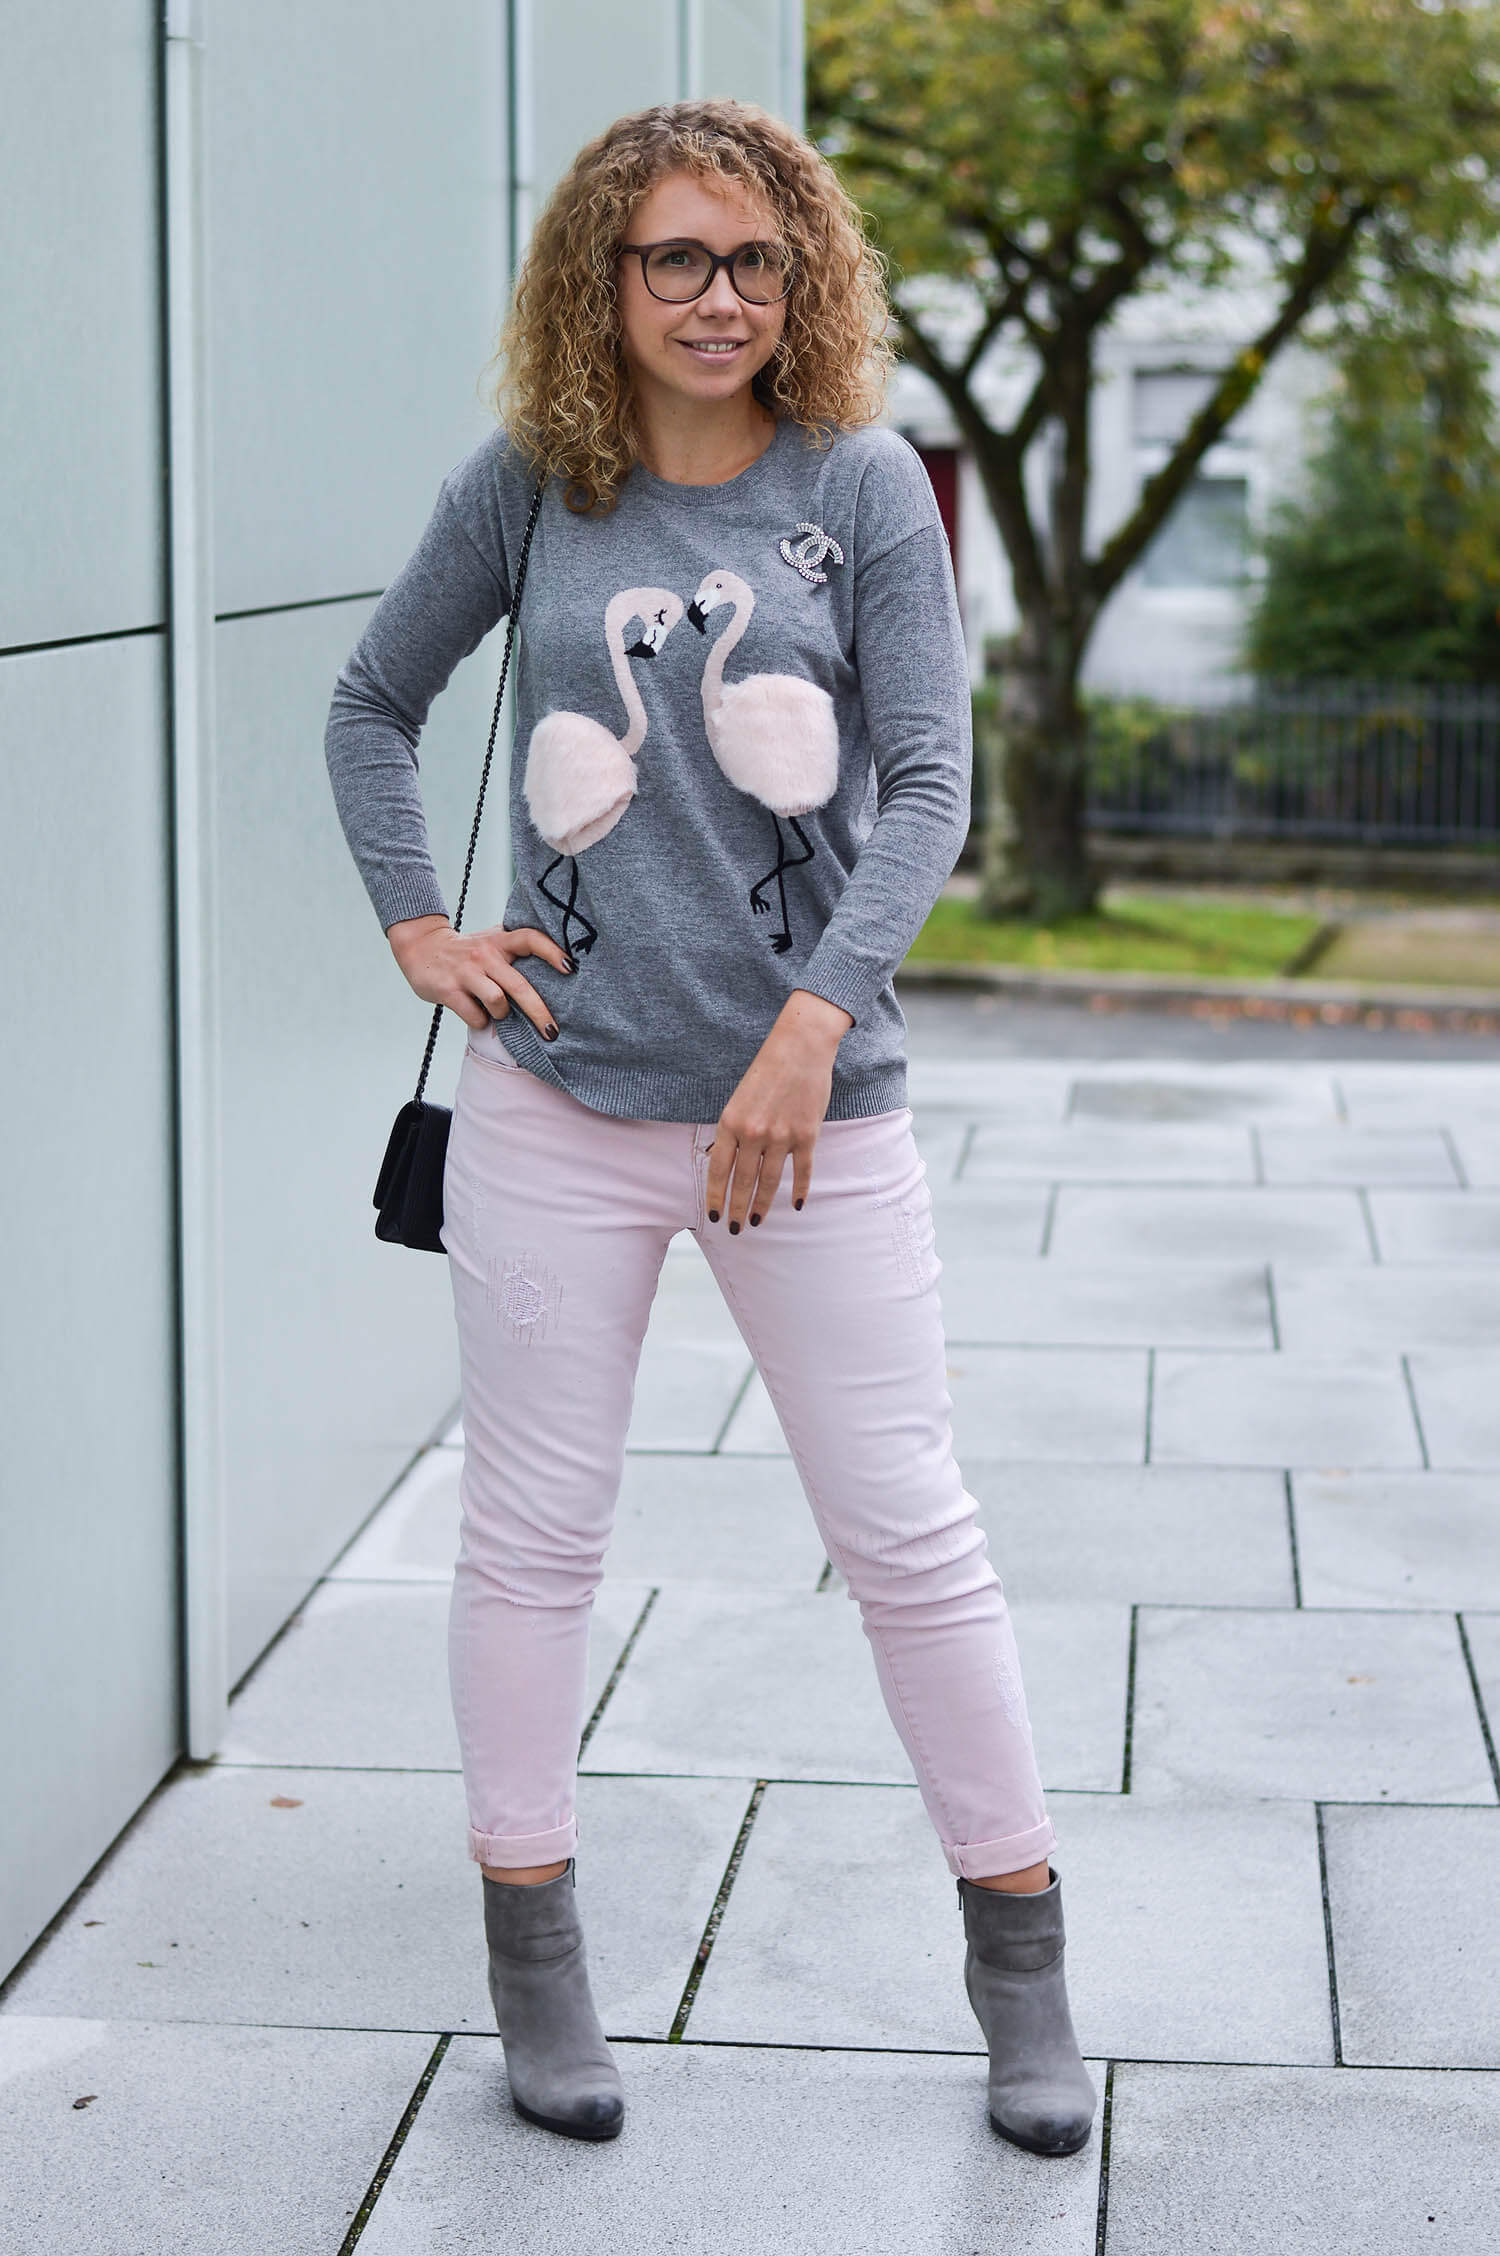 Kationette-fashionblog-nrw-Outfit-Pale-pink-and-grey-with-Flamingo-Sweater-and-Chanel-streetstyle